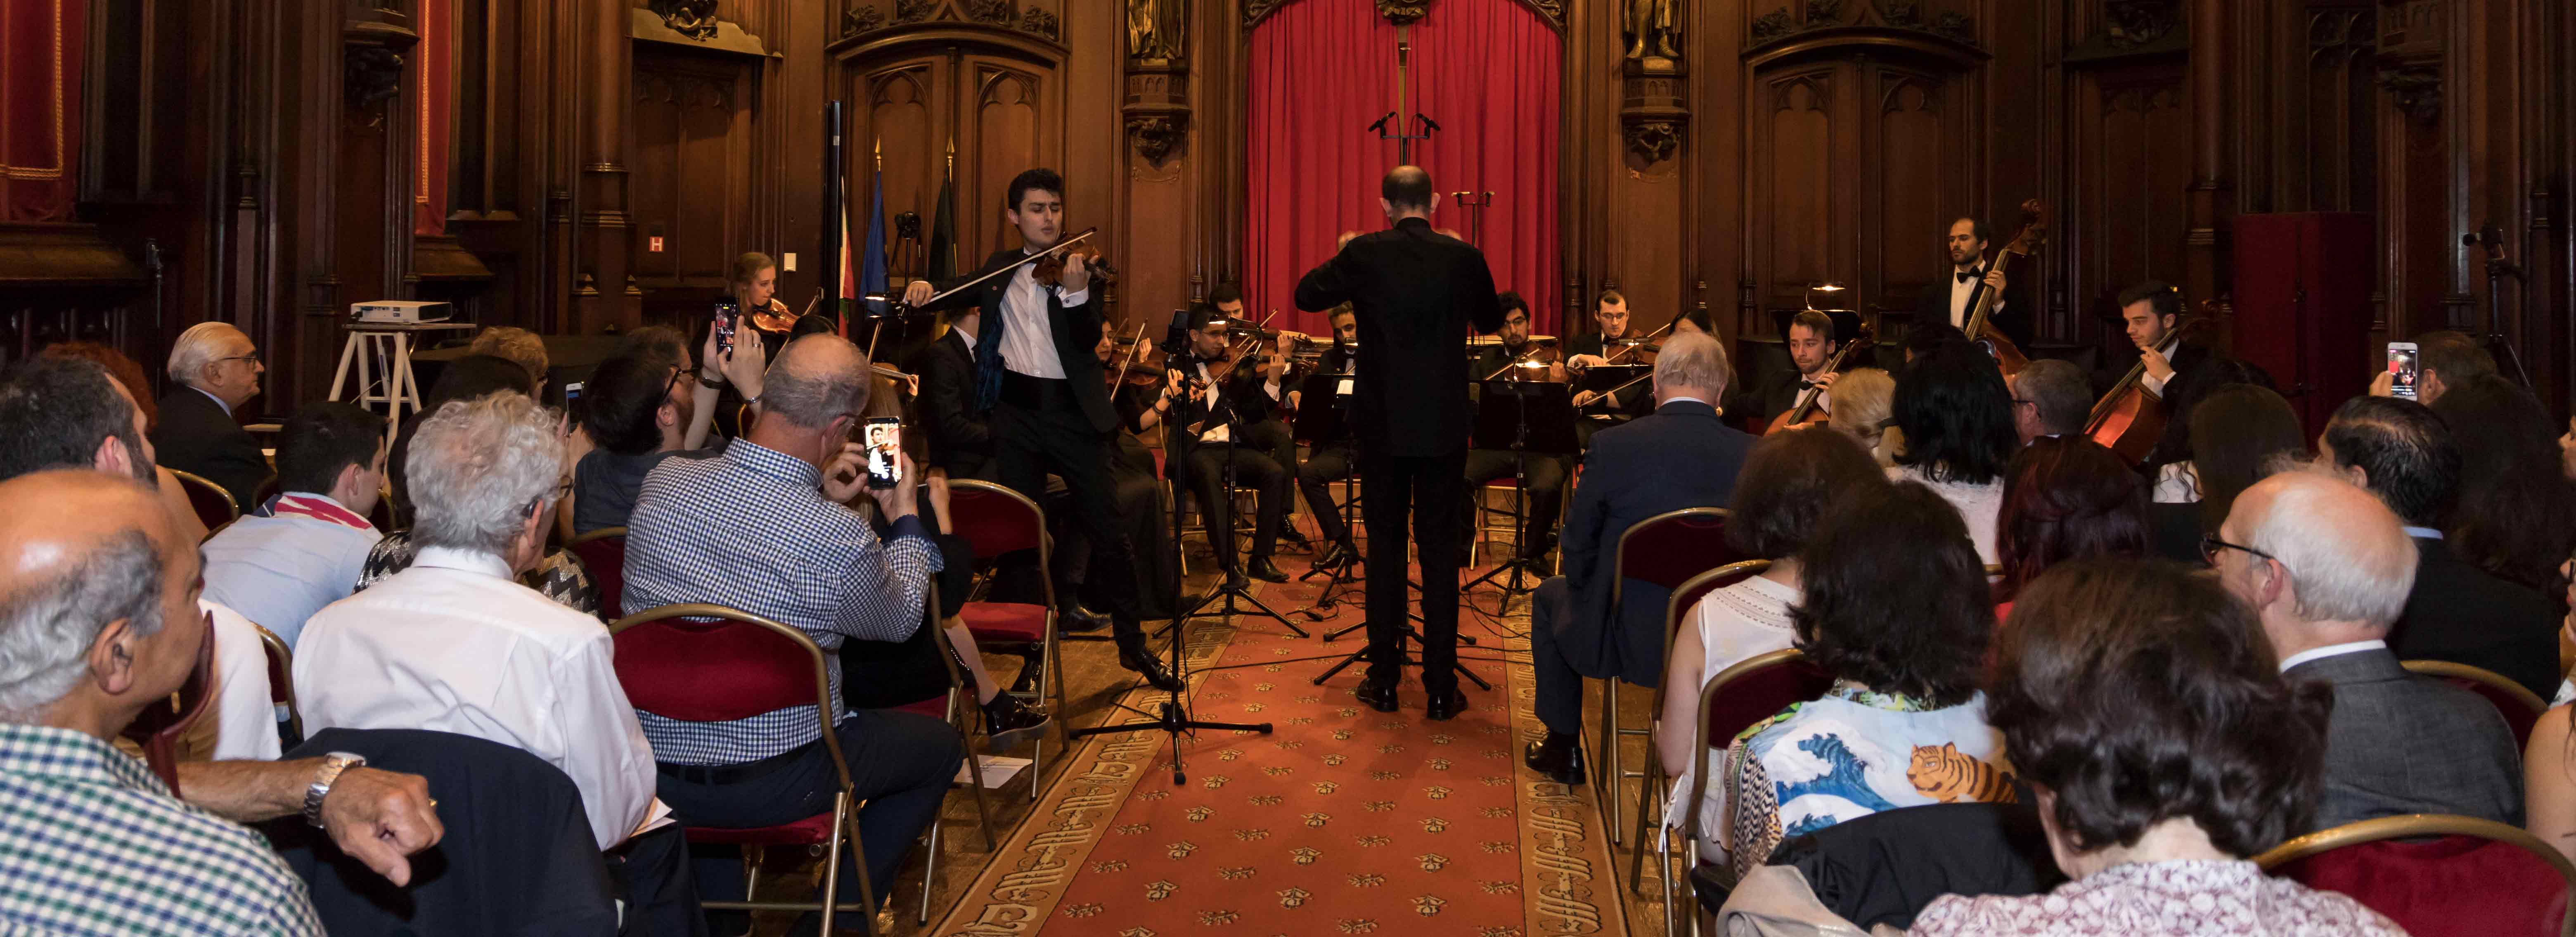 AGBU Europe Marks the Centennial of the First Republic of Armenia with Musical Weekend in Brussels